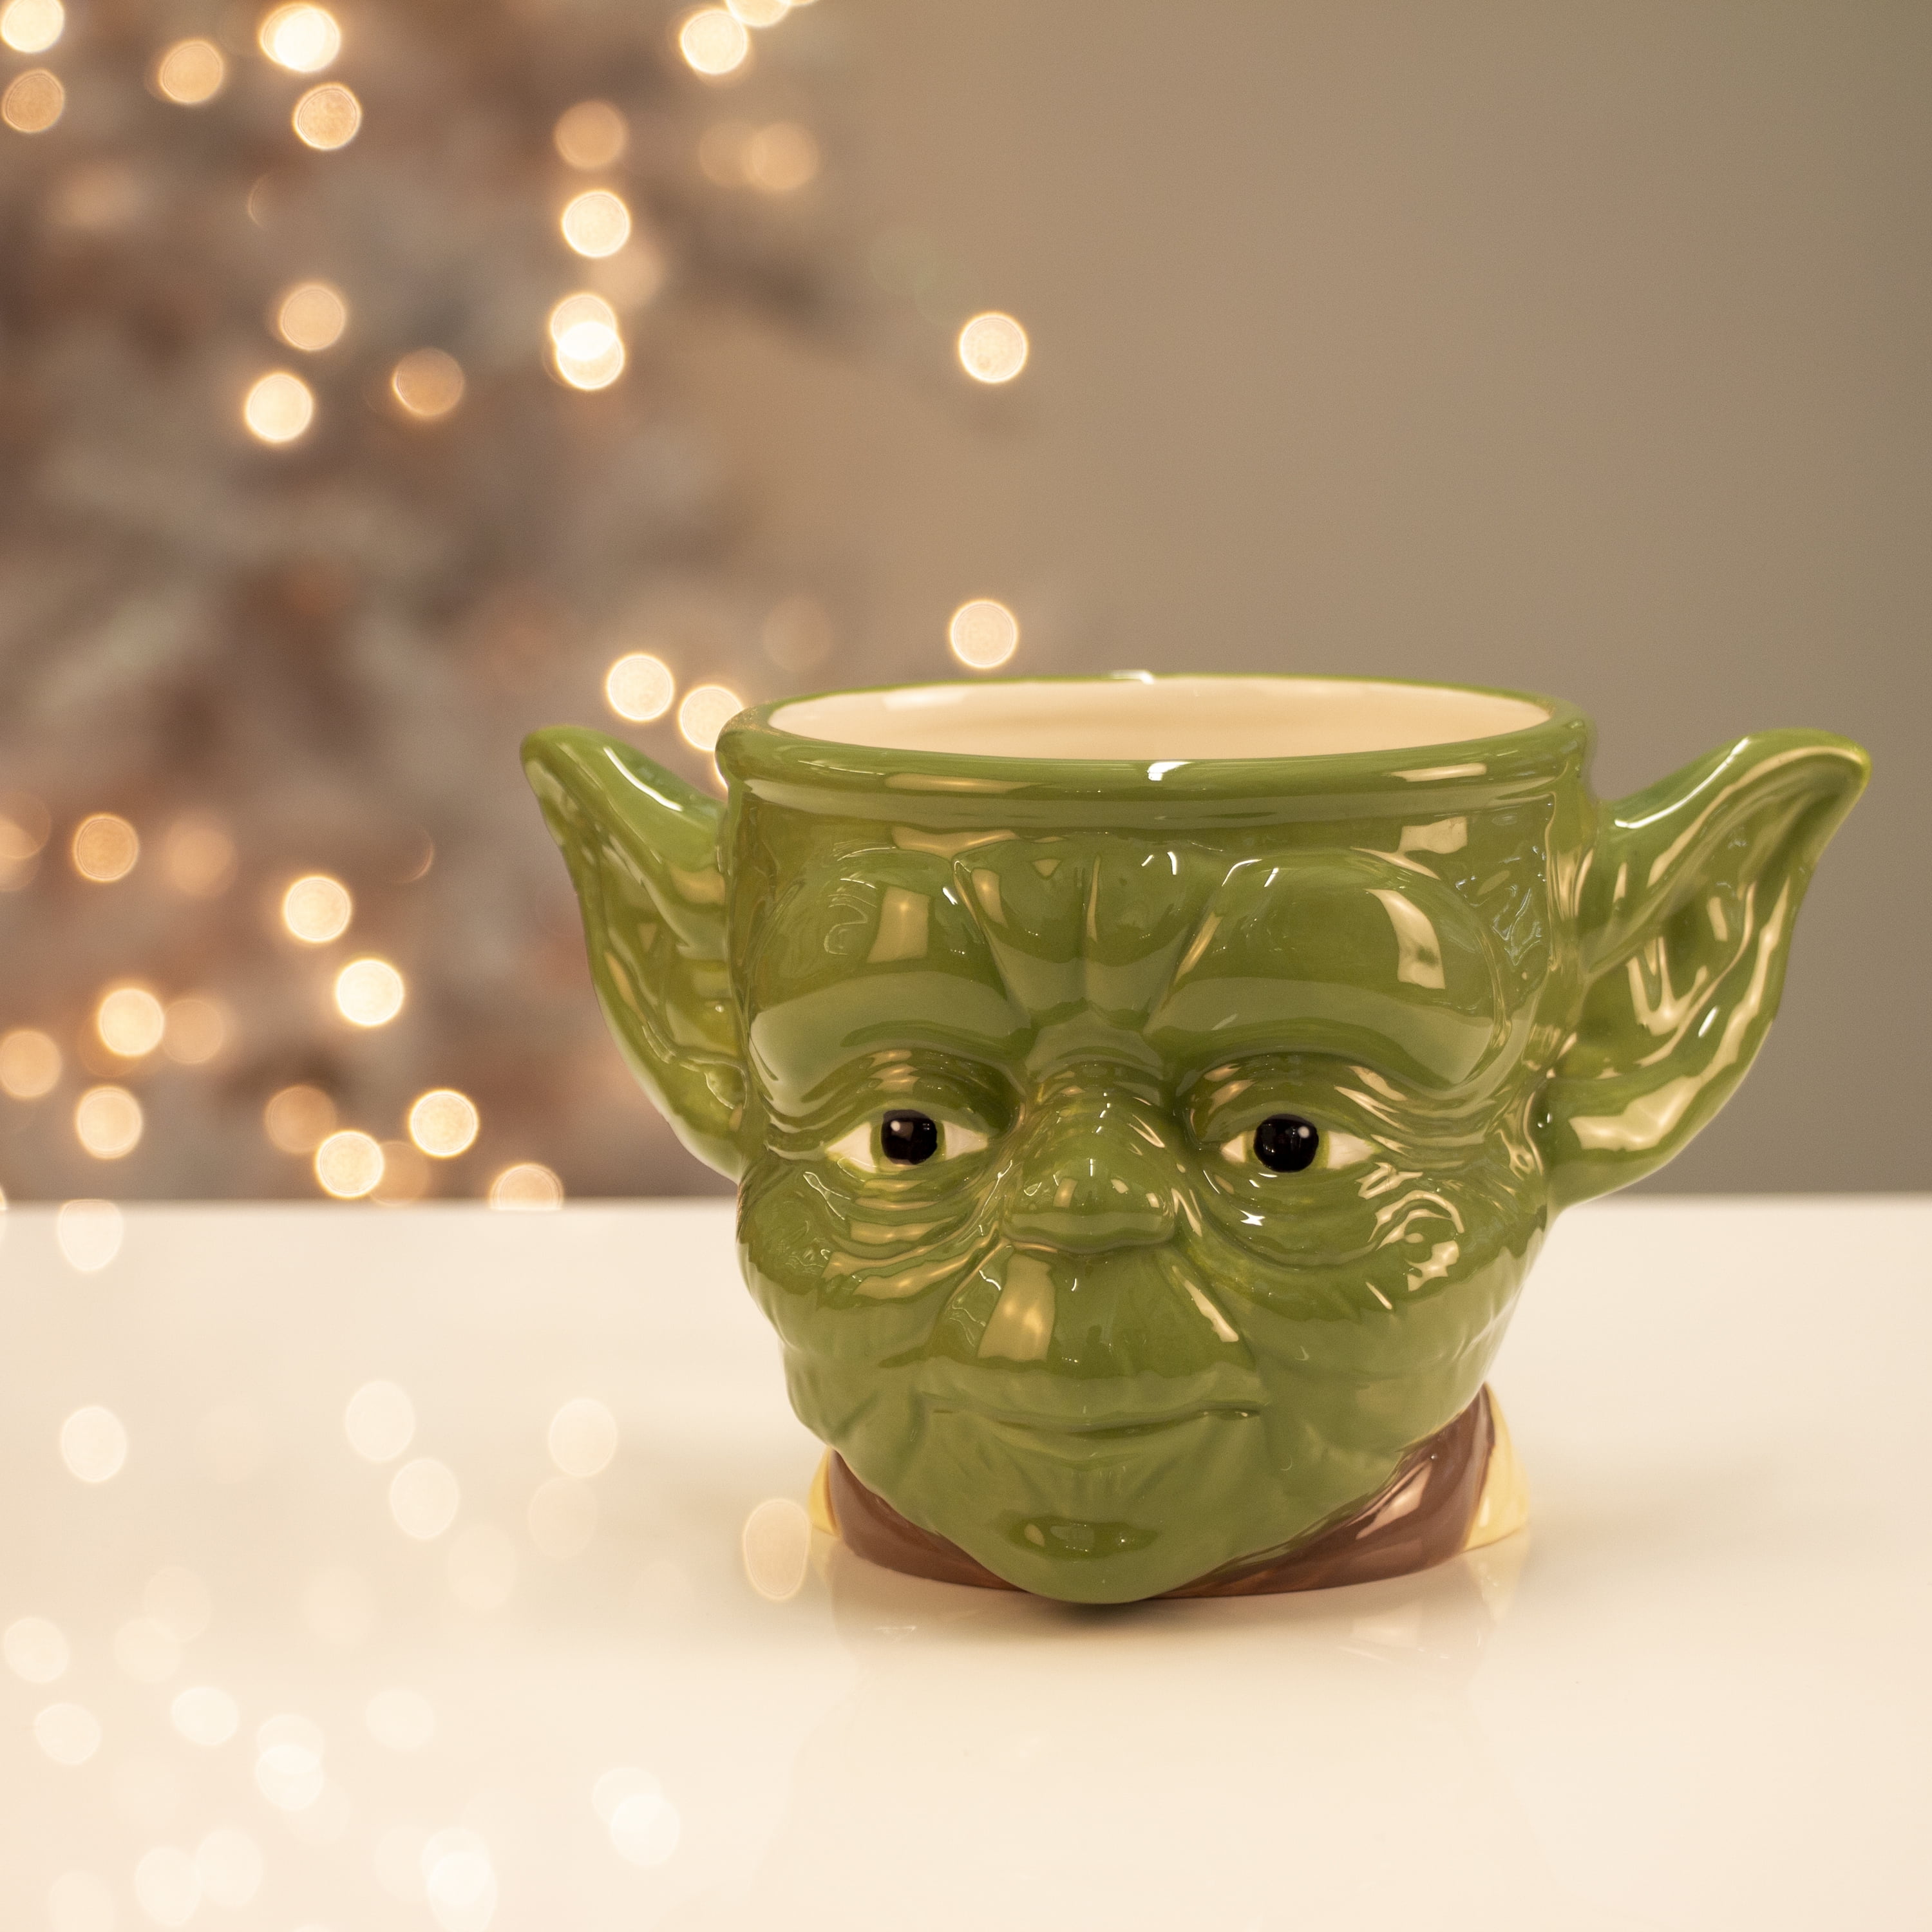  Star Wars Yoda Ceramic Goblet with Chocolate Fudge Cocoa Mix  Gift Set : Gourmet Chocolate Gifts : Grocery & Gourmet Food